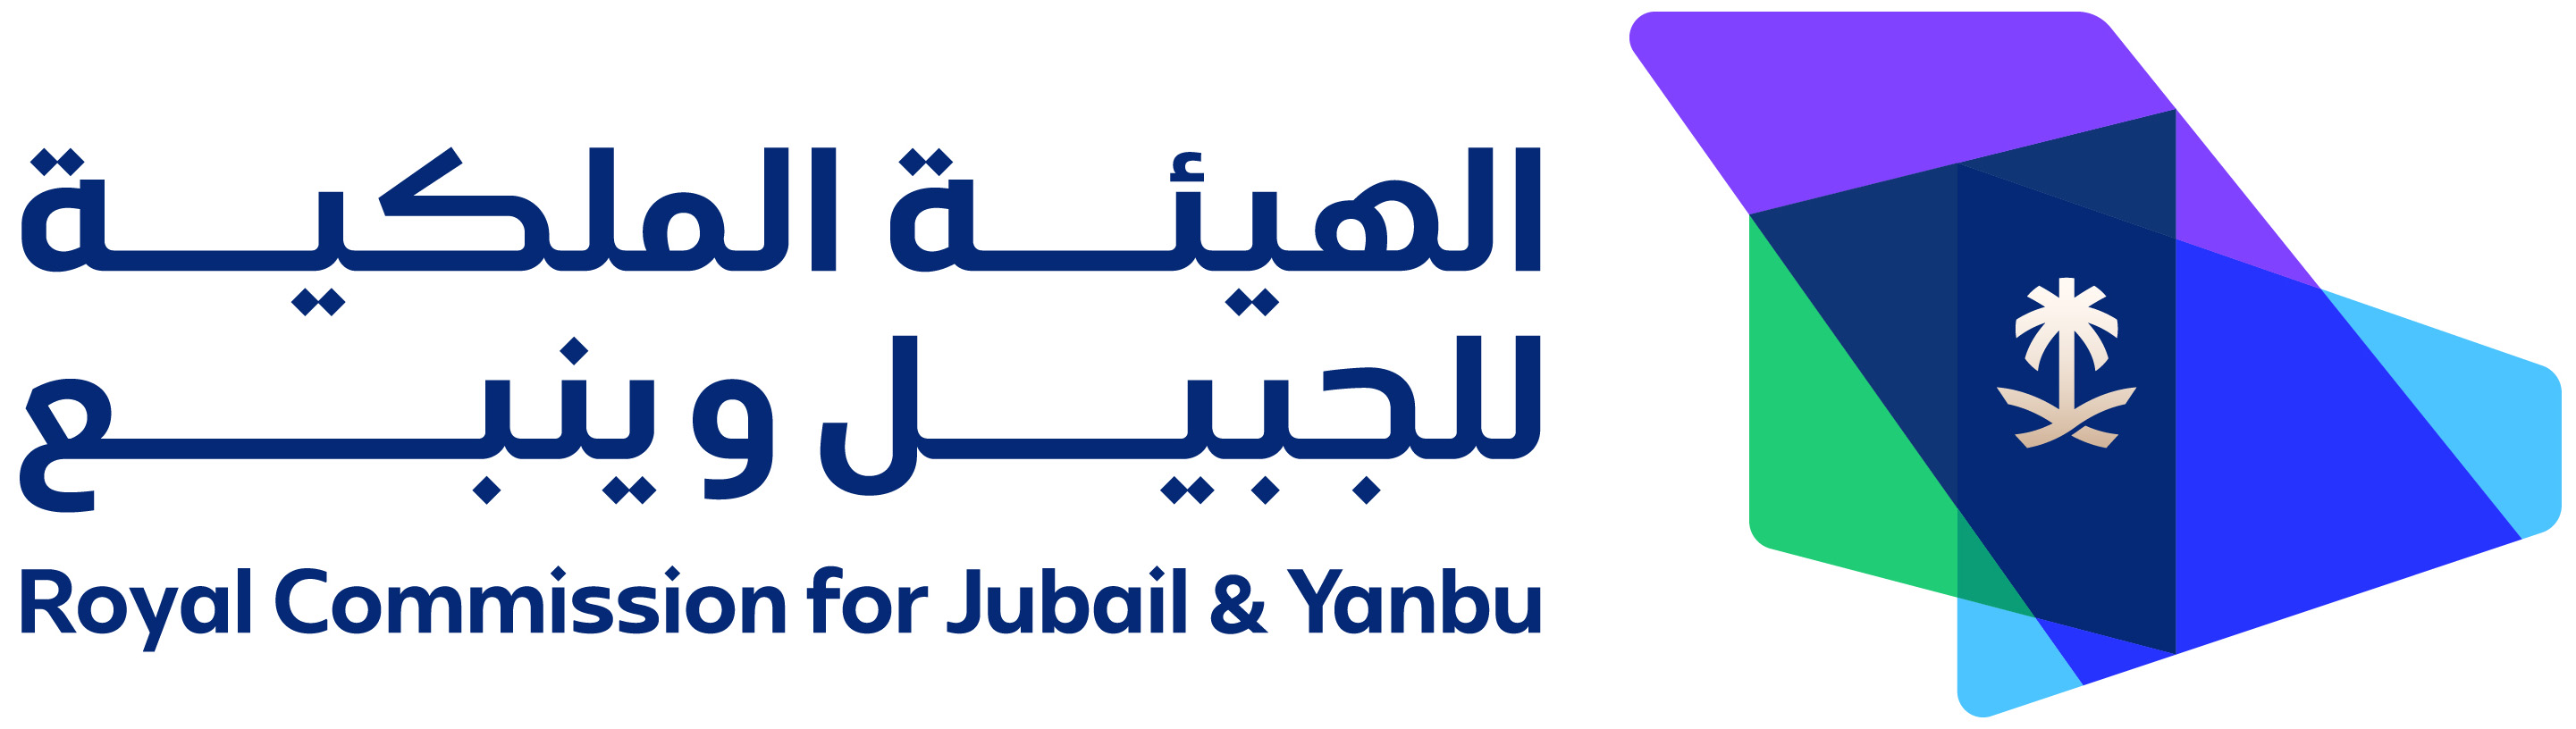 ROYAL COMMISSION FOR JUBAIL AND YANBU.